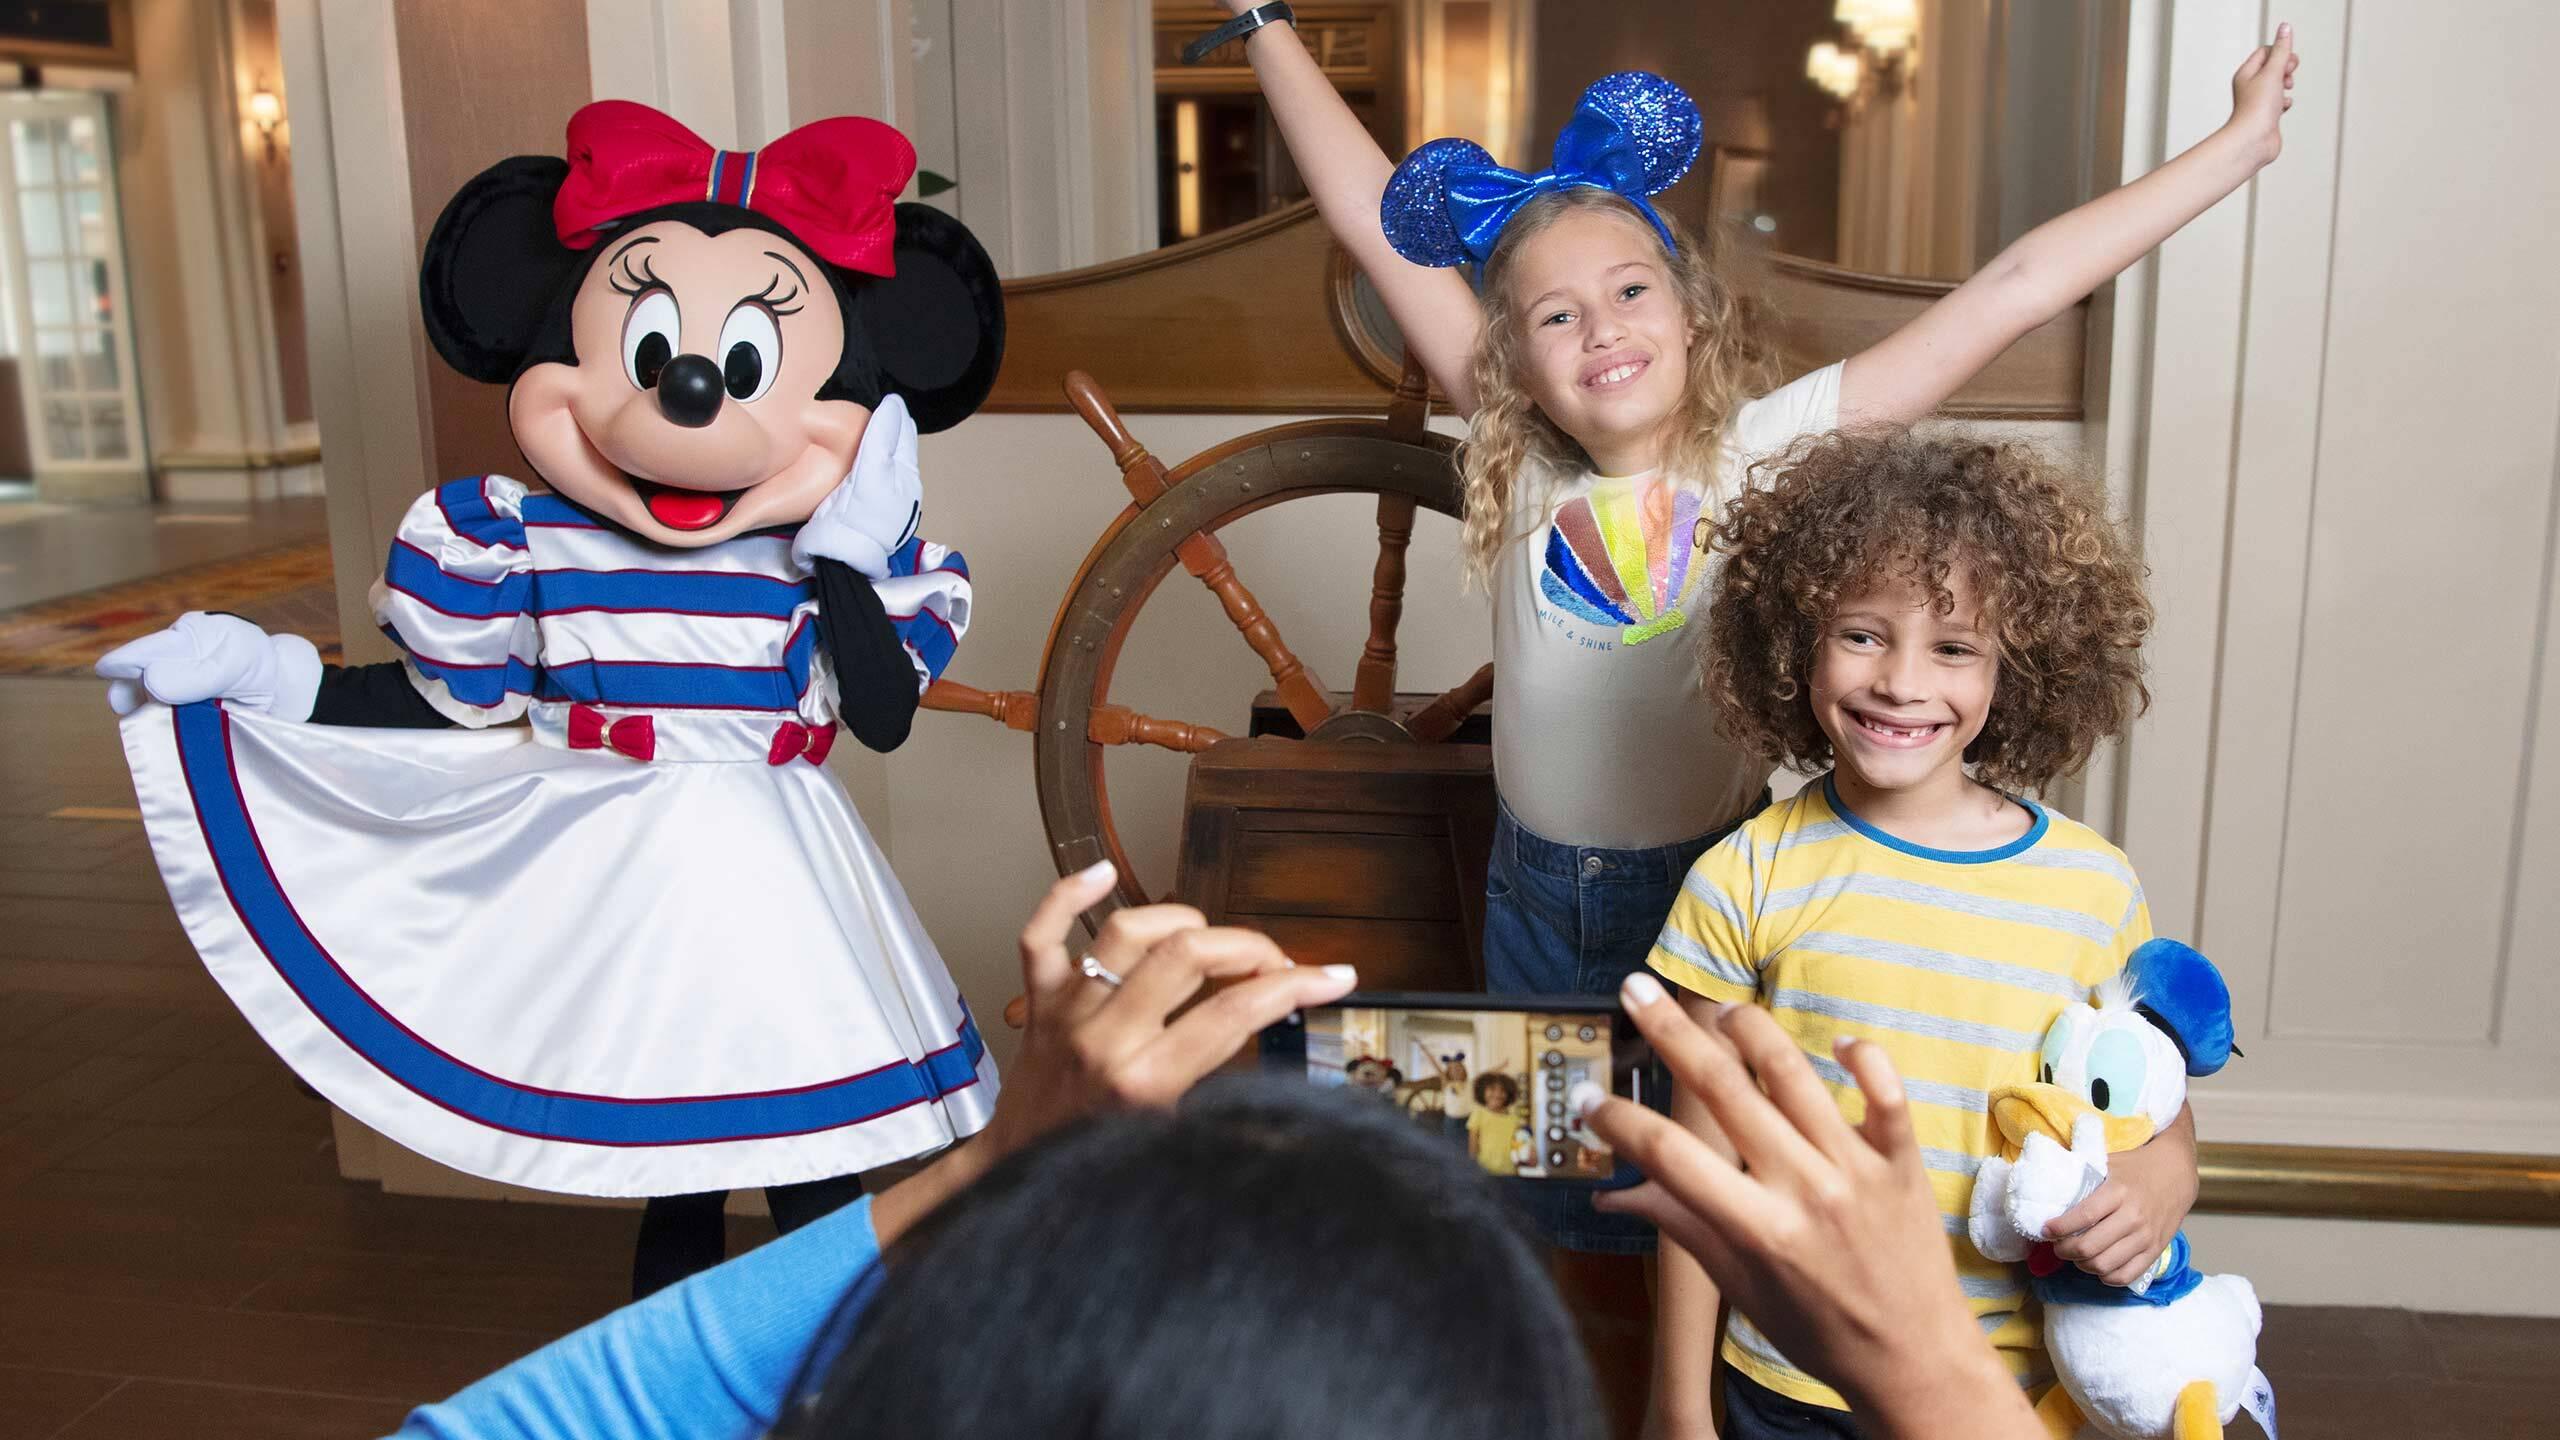 Share an unforgettable moment with Disney Characters